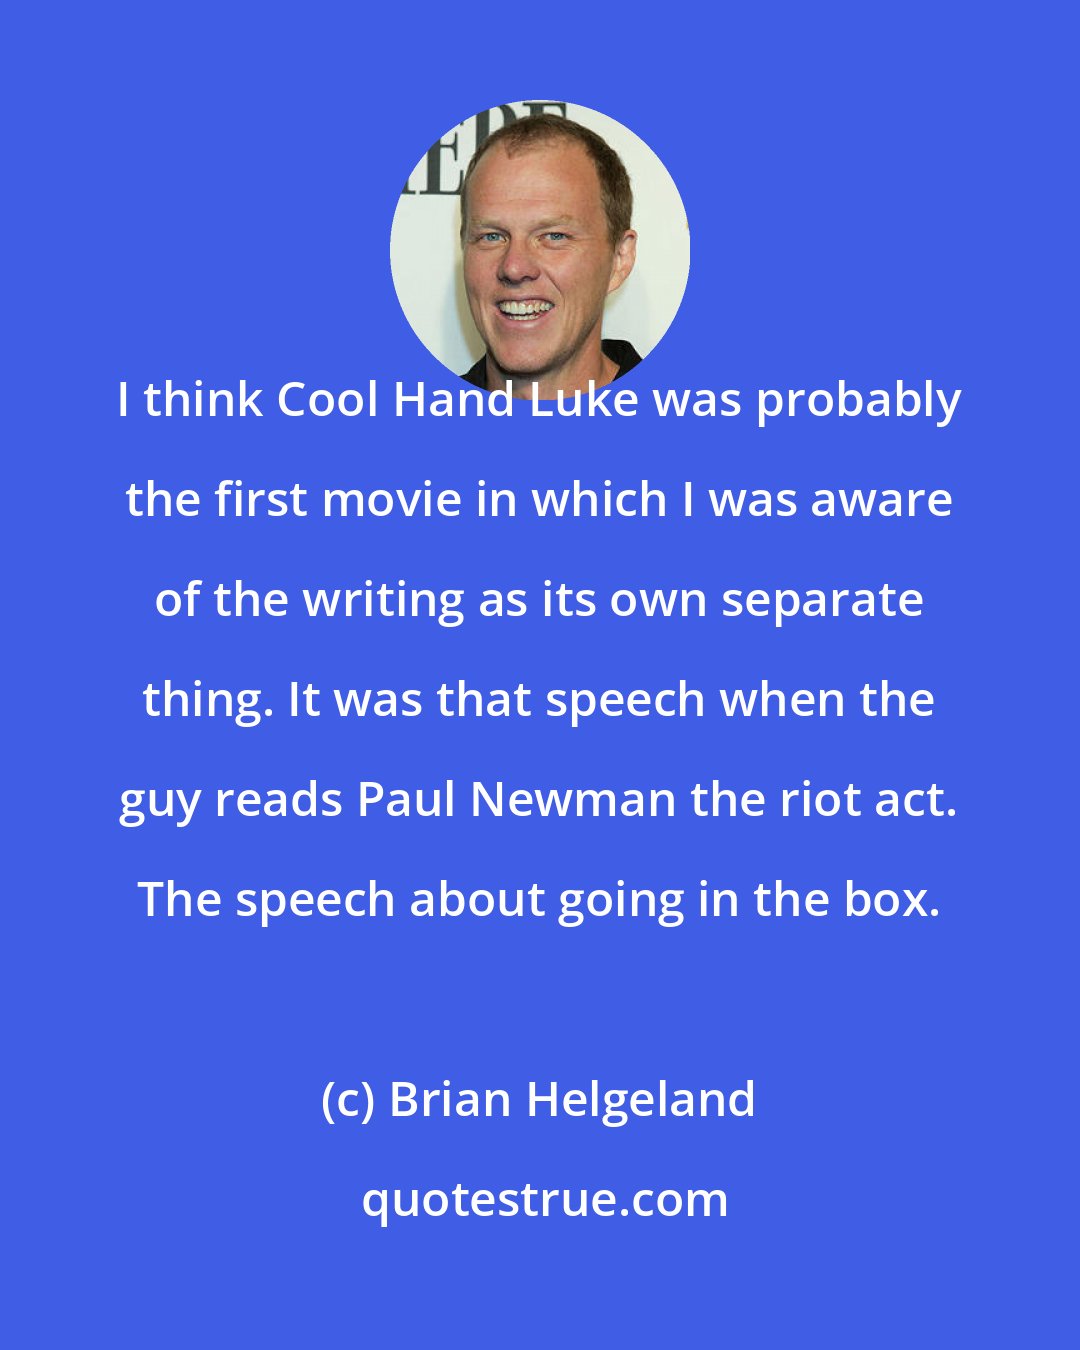 Brian Helgeland: I think Cool Hand Luke was probably the first movie in which I was aware of the writing as its own separate thing. It was that speech when the guy reads Paul Newman the riot act. The speech about going in the box.